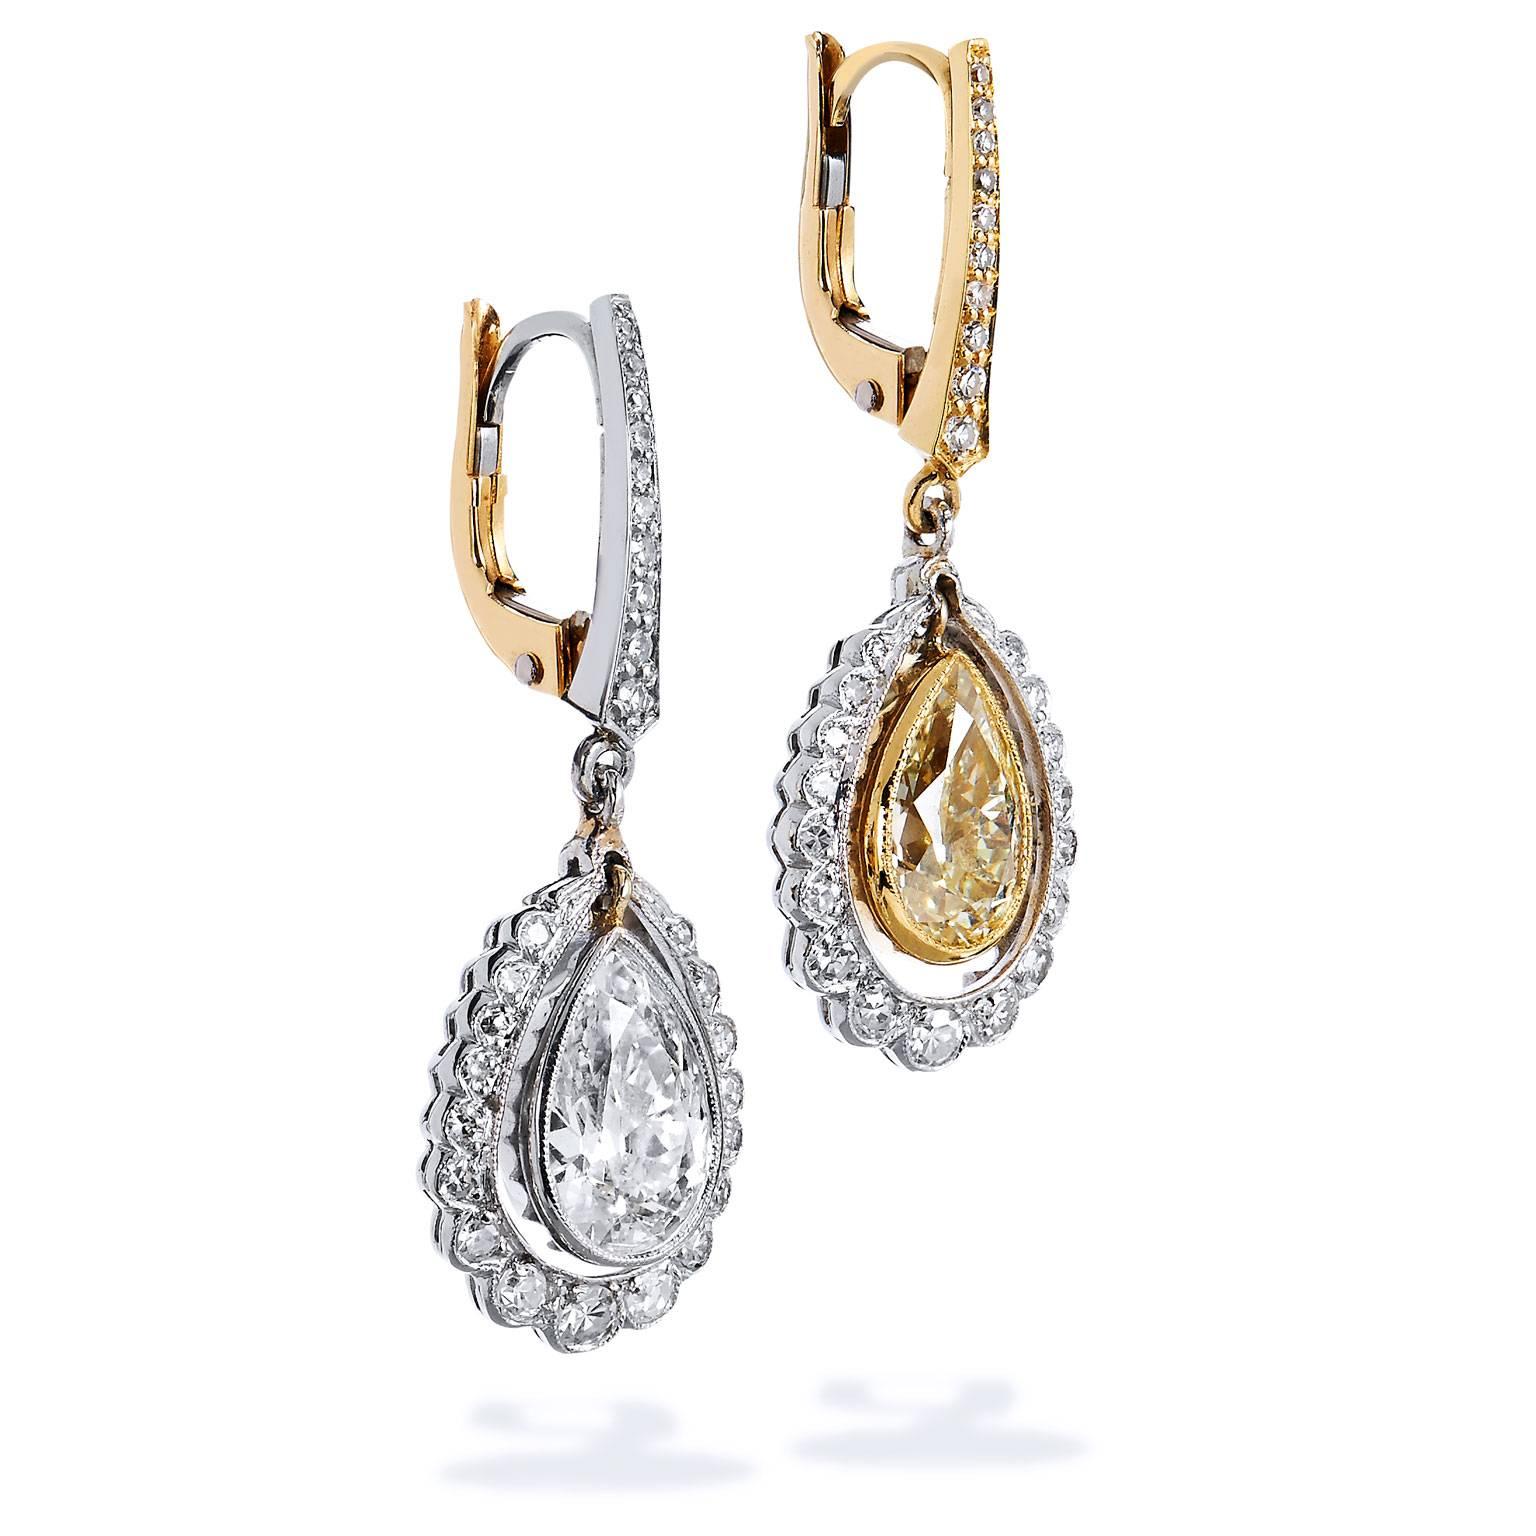 For the woman whose style is classic yet edgy, enjoy these Art Deco inspired lever-back earrings. Handmade by H, these 2.70 carat diamond,18 karat yellow gold and two-tone 18 karat yellow gold and platinum Morphosis dangle earrings epitomize